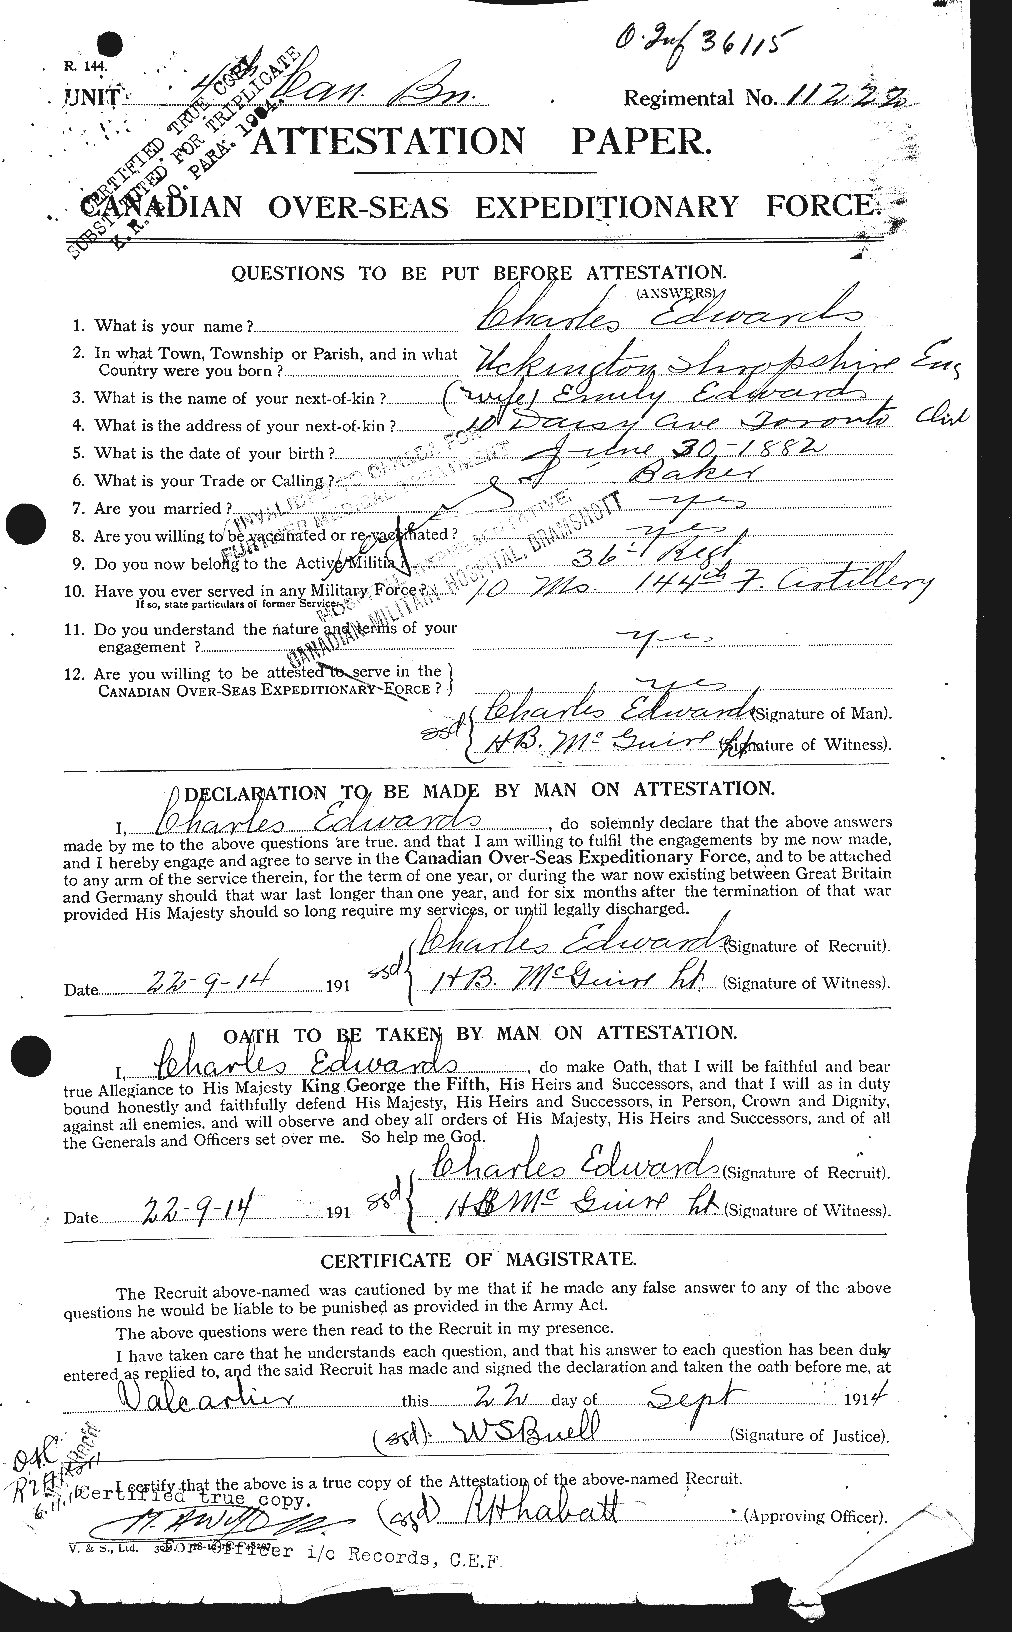 Personnel Records of the First World War - CEF 307829a